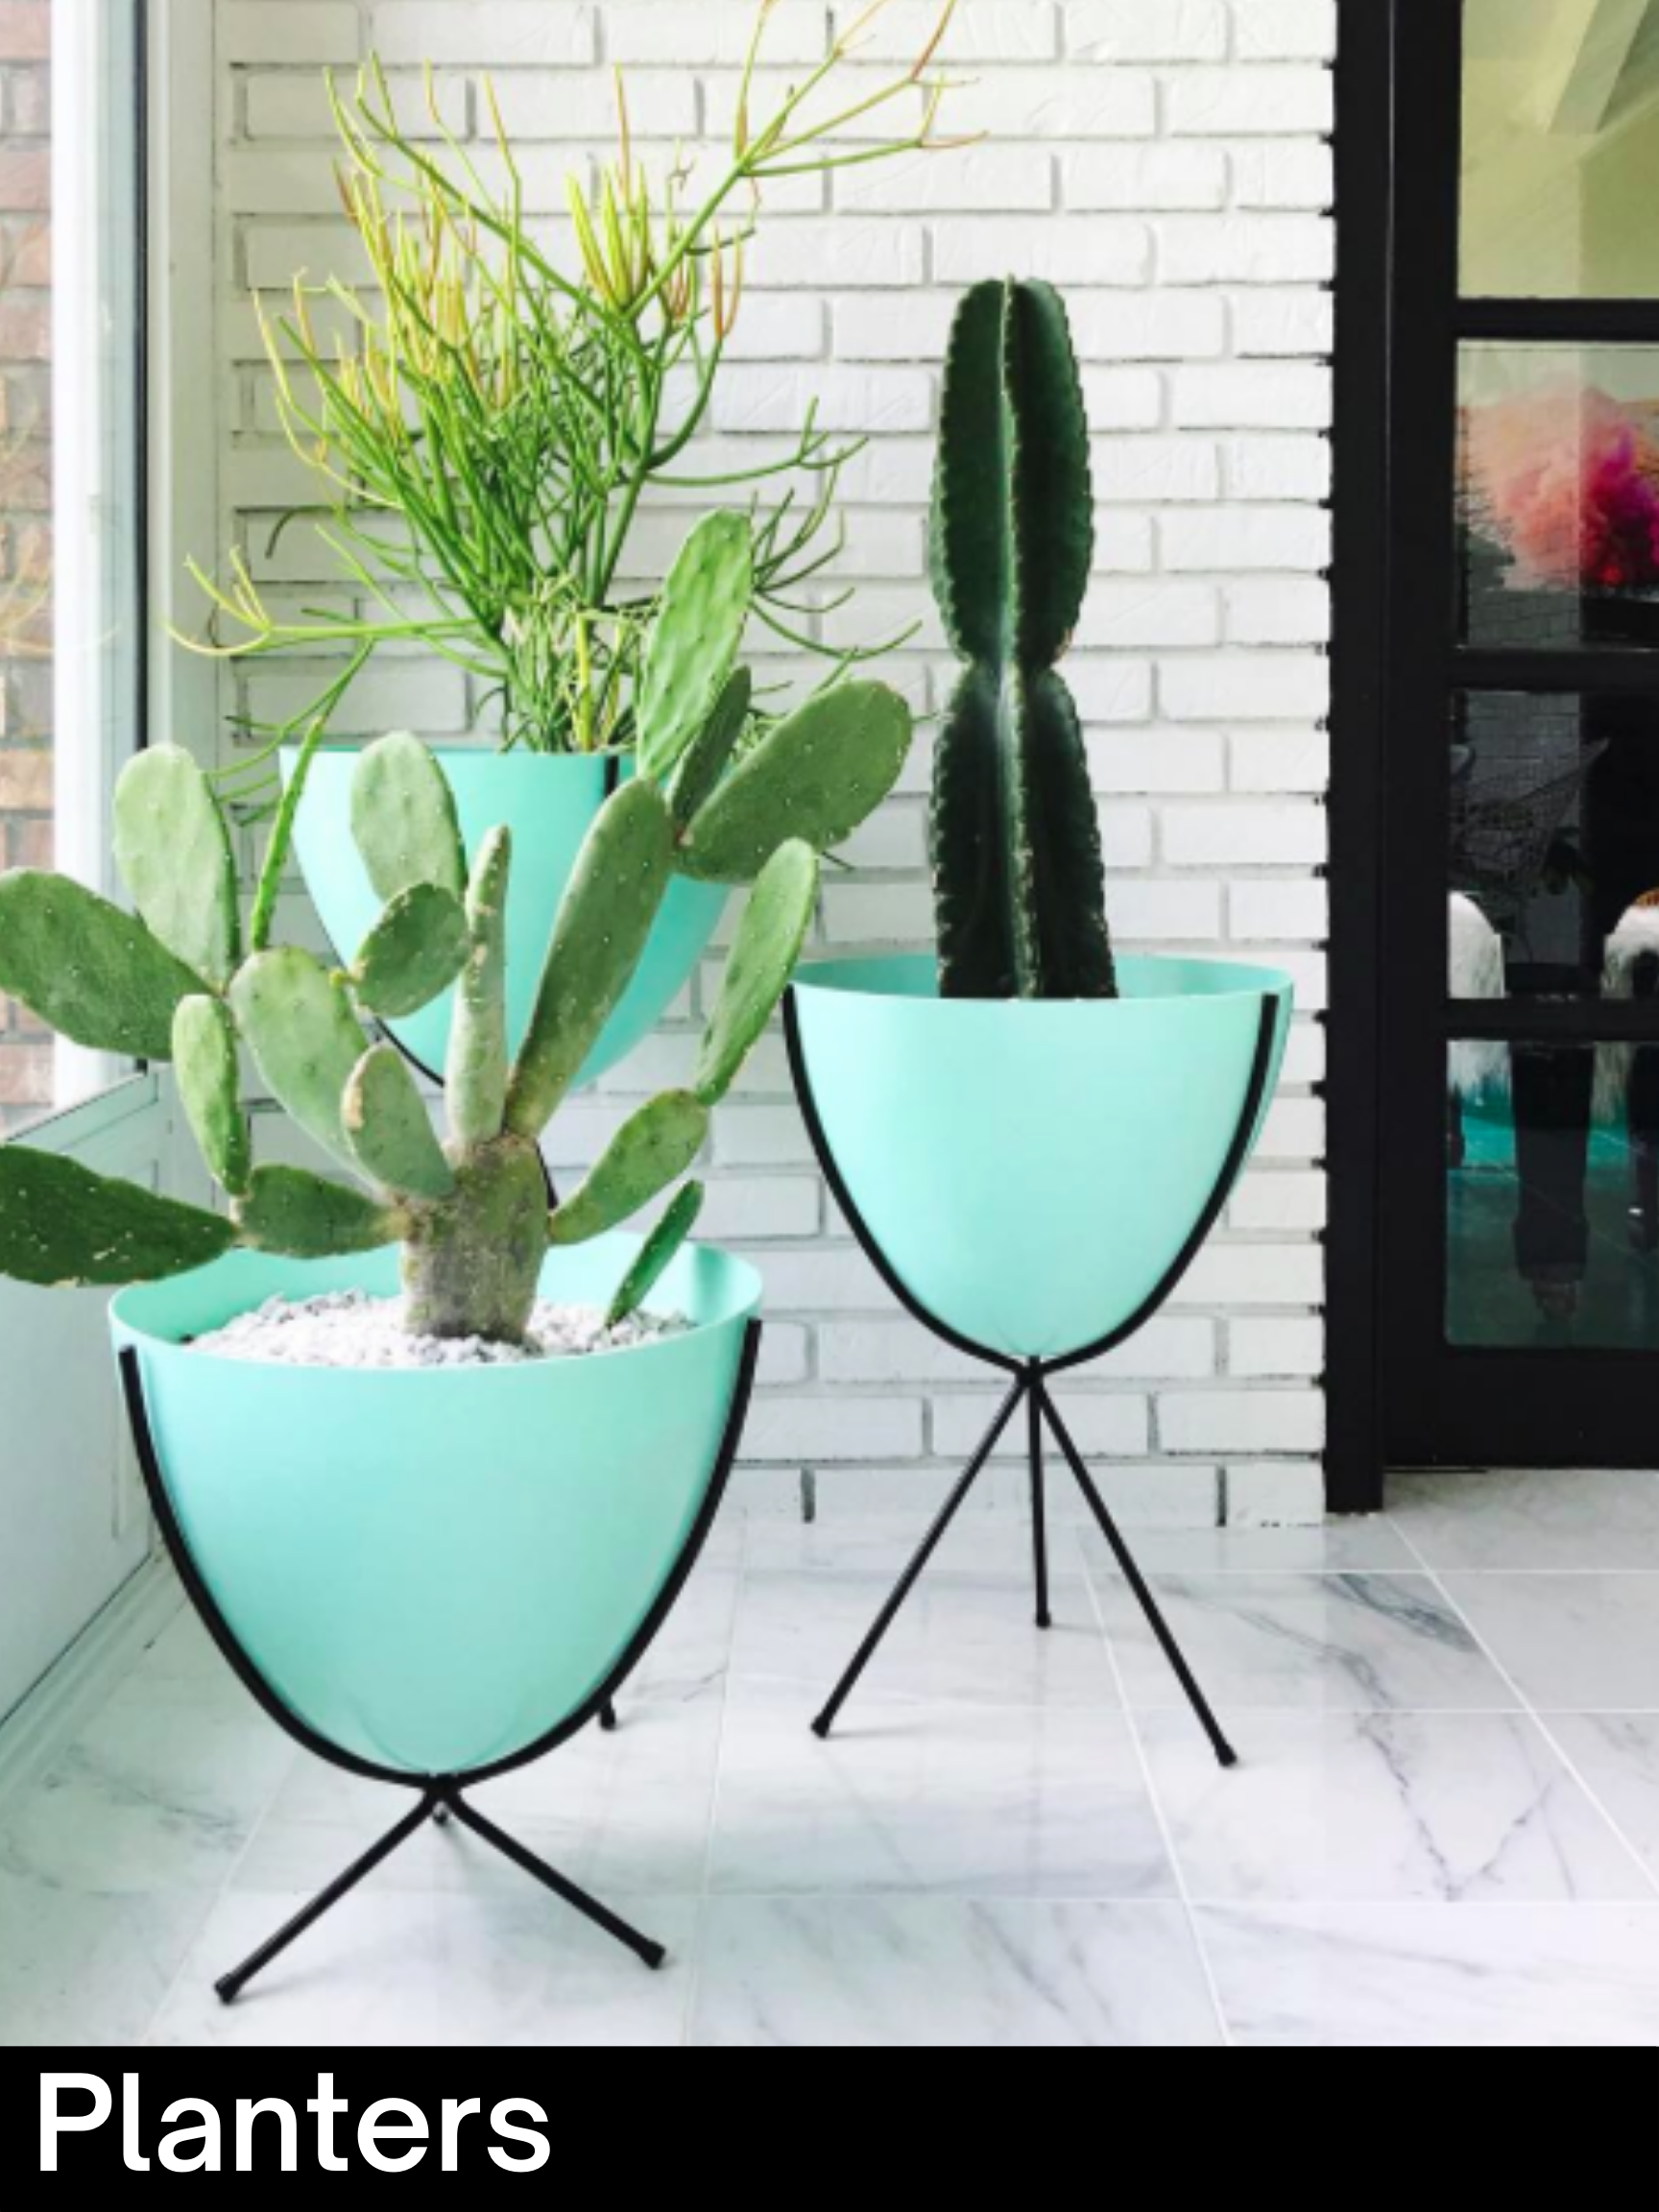 Mid century modern planters, mid century modern bullet planters with stands in various colors